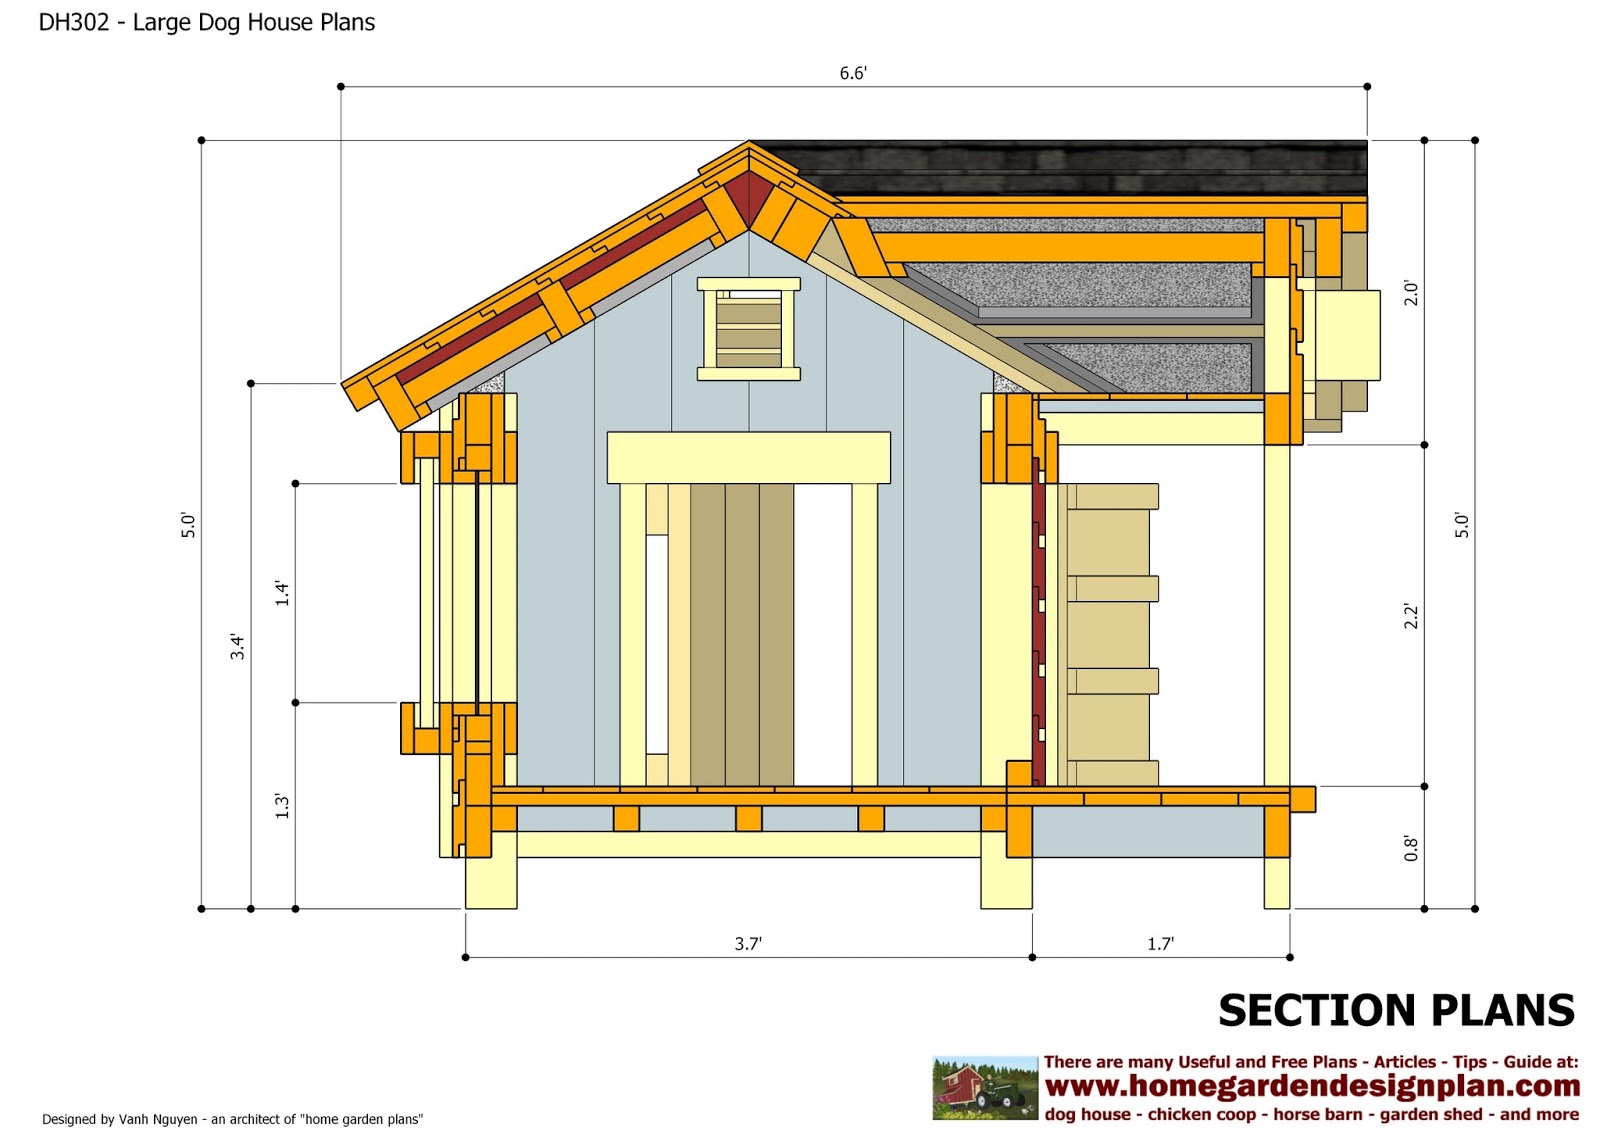 Dog House Plans Construction - Dog House Design - How To Build An